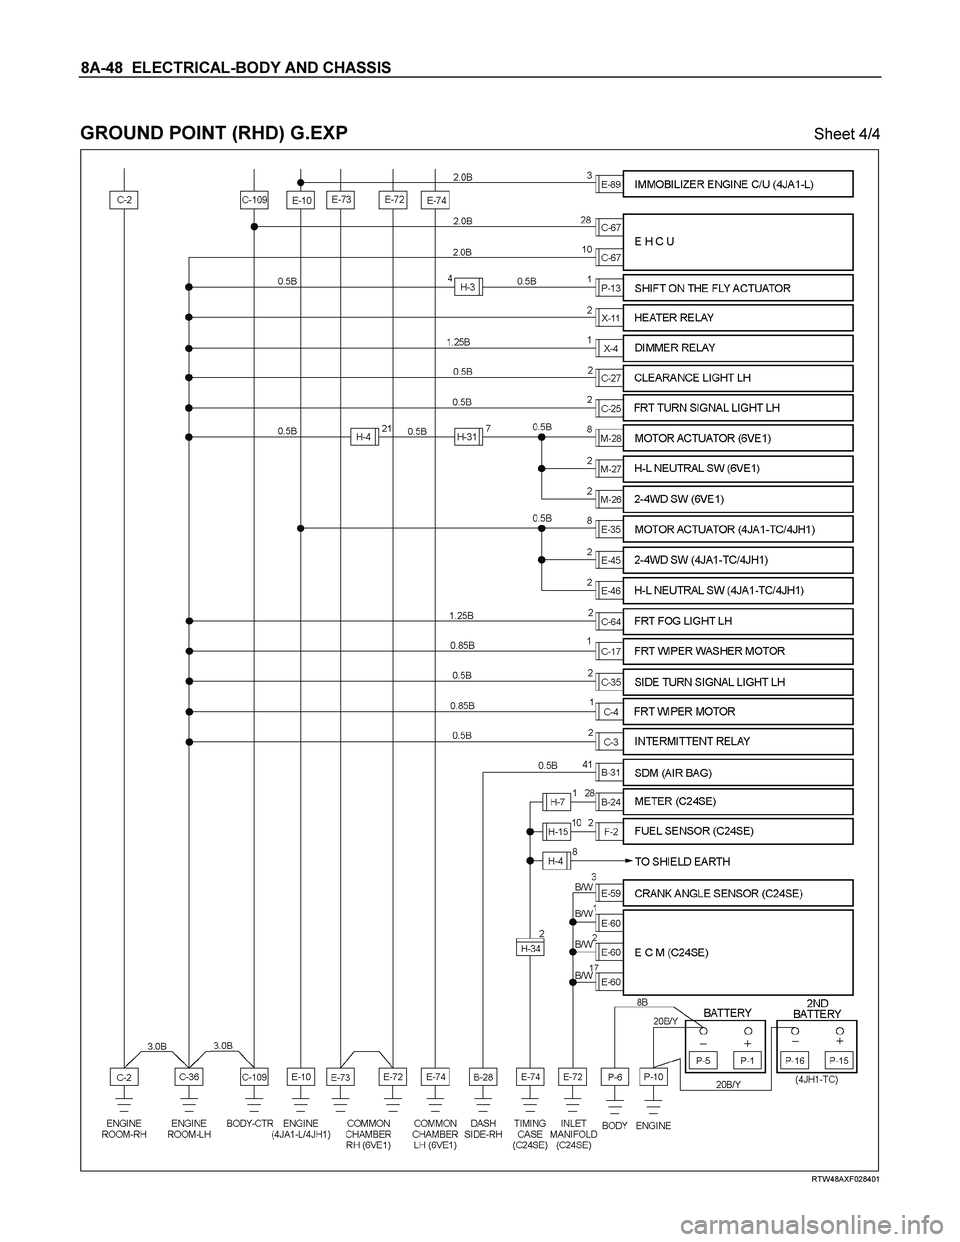 ISUZU TF SERIES 2004  Workshop Manual 8A-48  ELECTRICAL-BODY AND CHASSIS 
 
GROUND POINT (RHD) G.EXP   Sheet 4/4 
 
 
 
 
RTW48AXF028401  